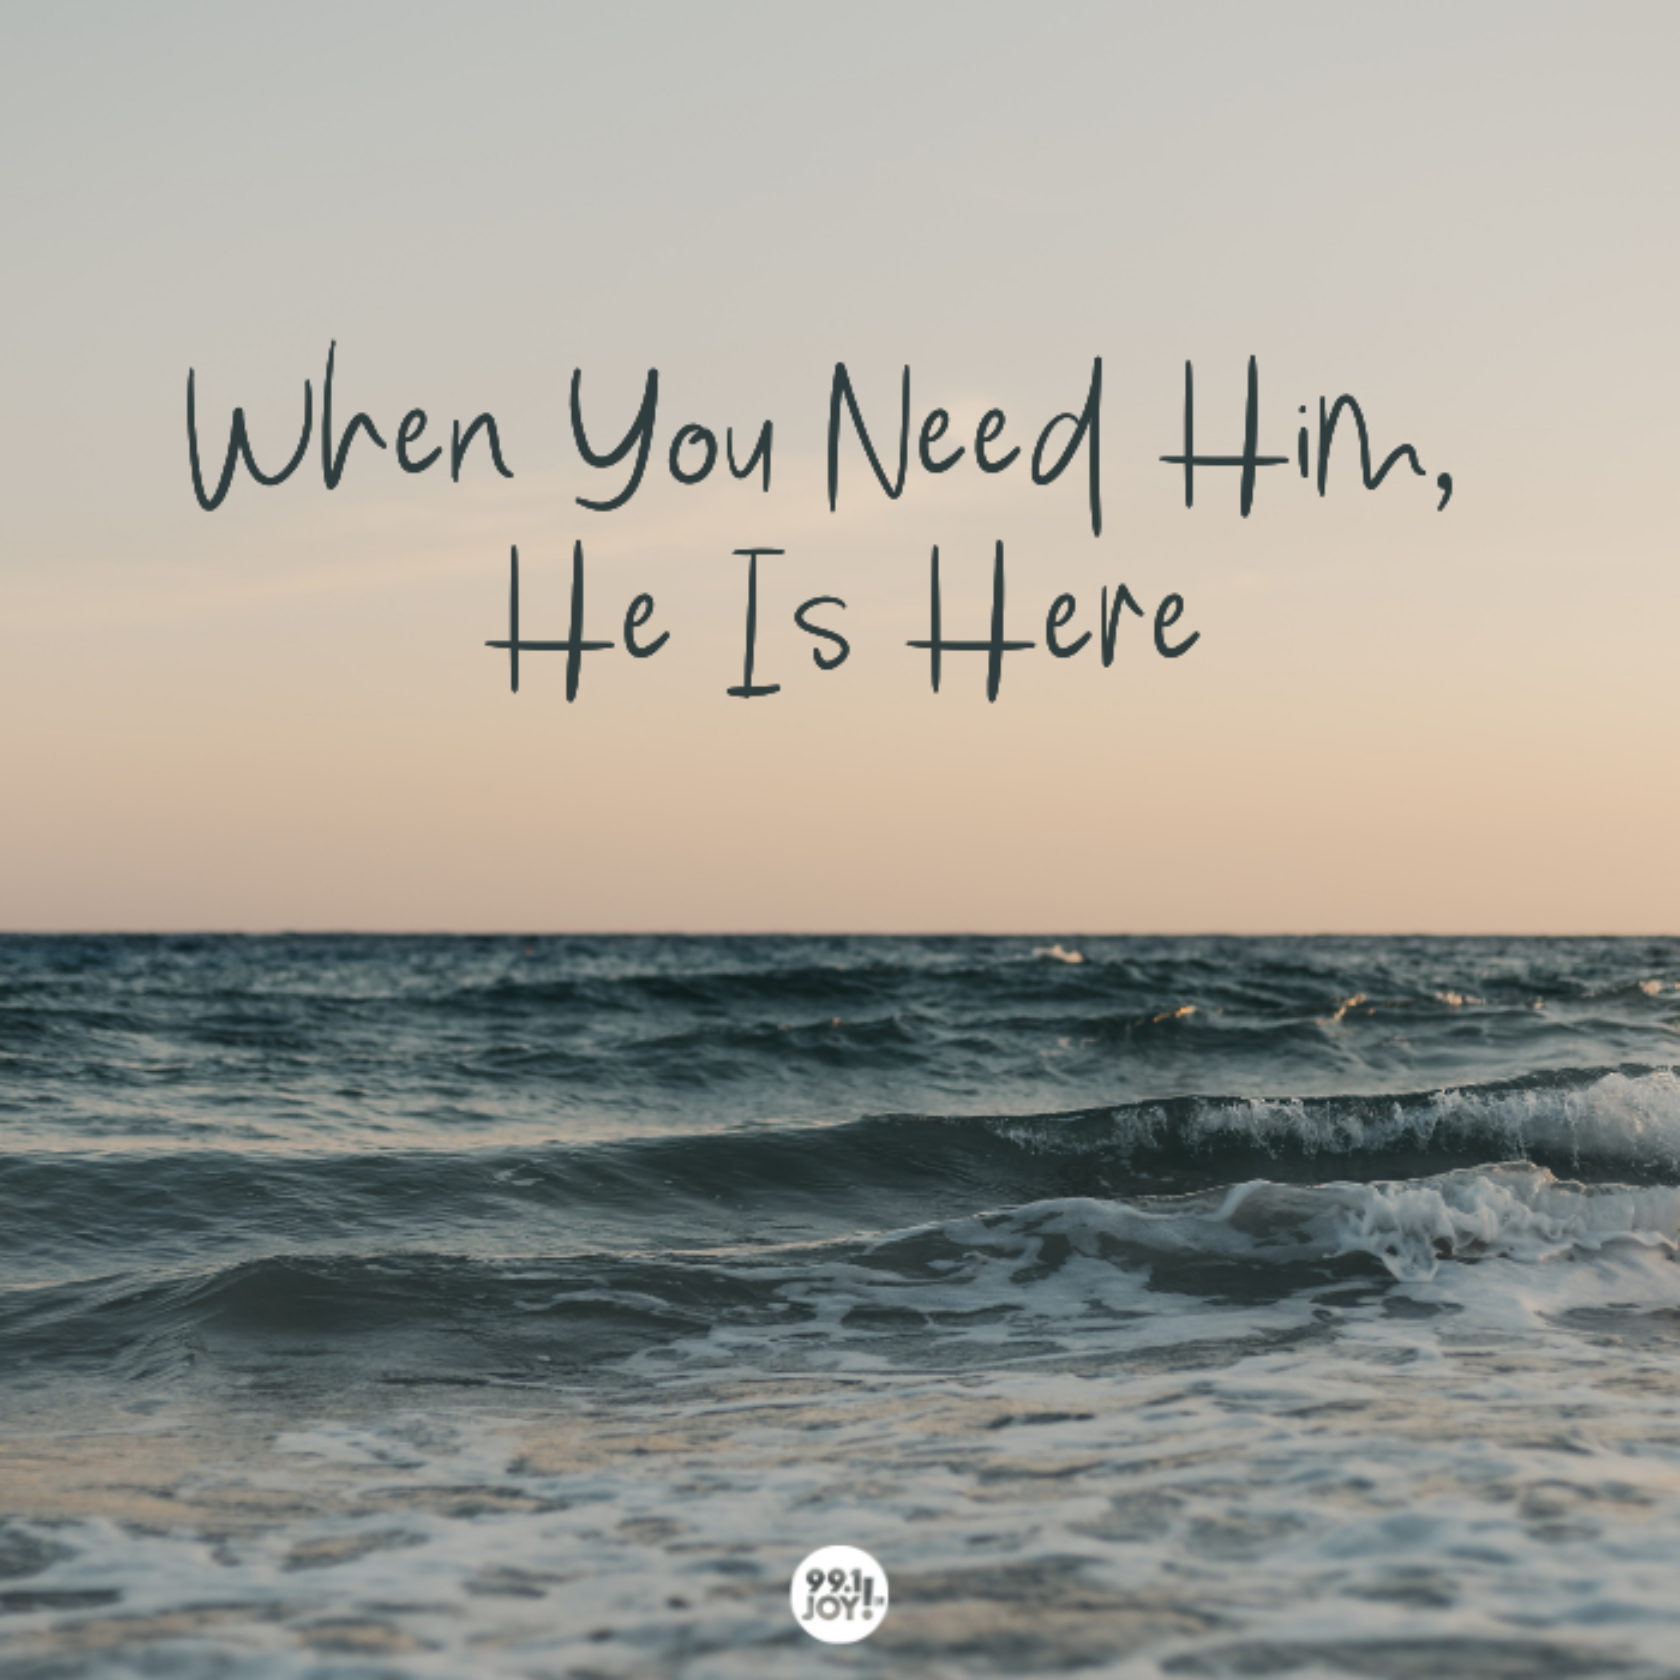 When You Need Him, He Is Here